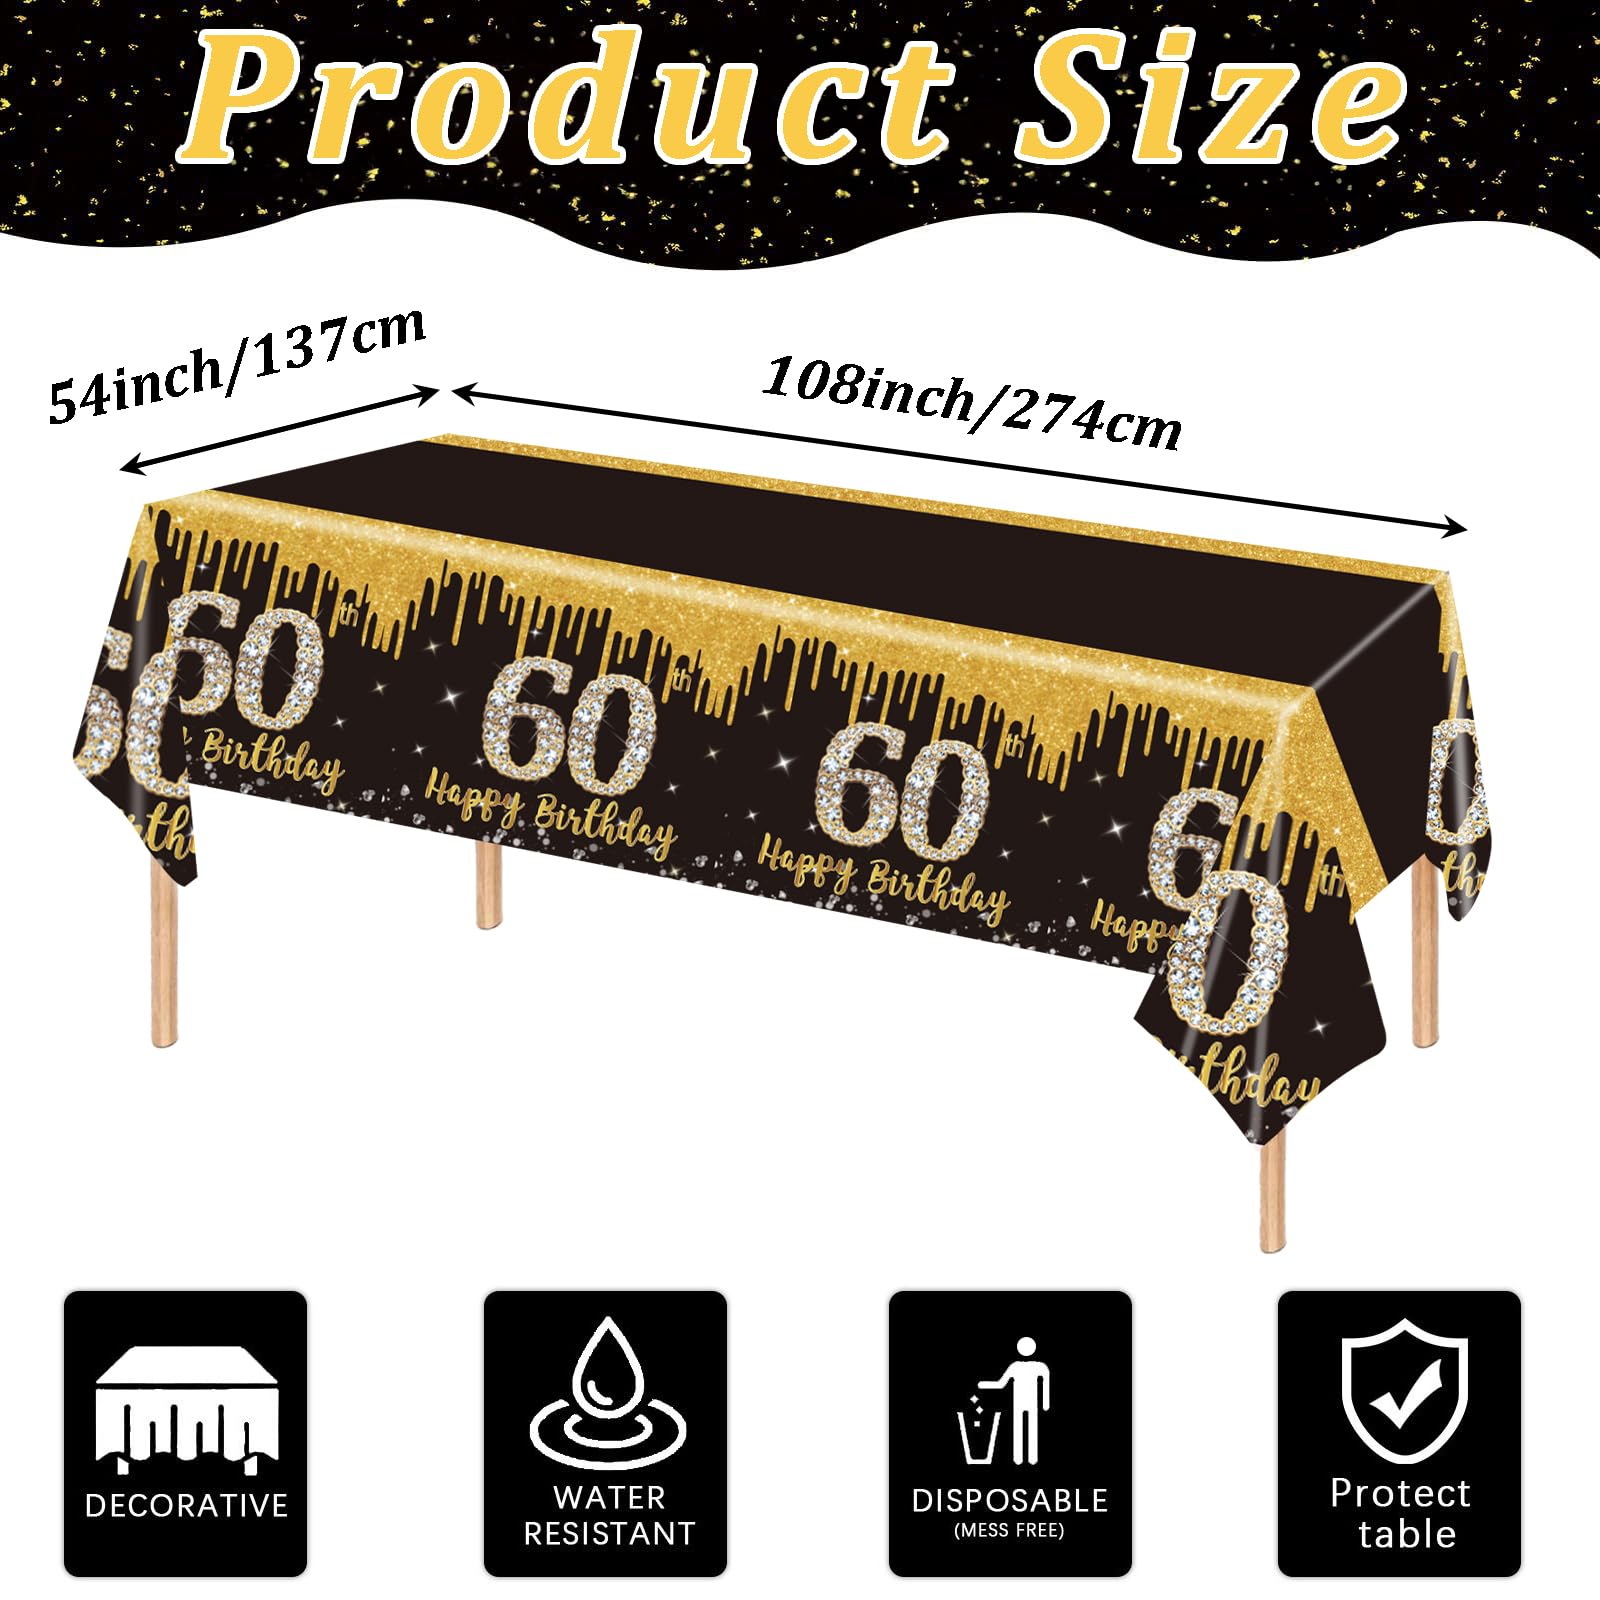 60th Birthday Table Cloth Black Gold,137*274cm Black Gold 60th Birthday Party Table Decoration Plastic Waterproof Rectangular Table Cover for Men Women Him Her Birthday Gifts Party Table Decoration